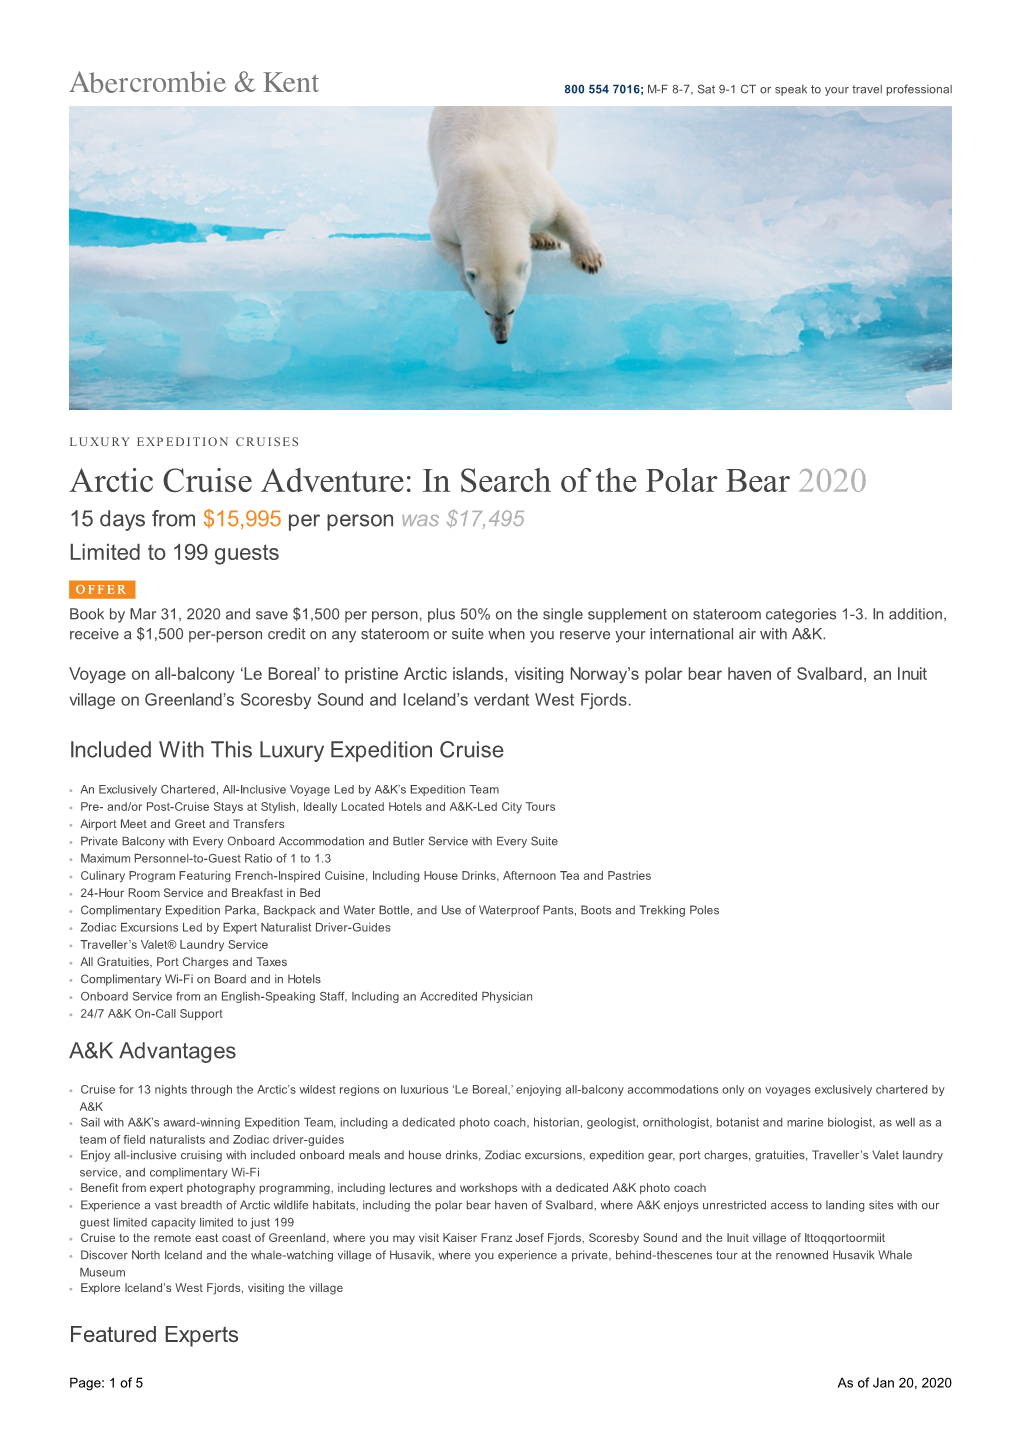 Arctic Cruise Adventure: in Search of the Polar Bear 2020 15 Days from $15,995 Per Person Was $17,495 Limited to 199 Guests